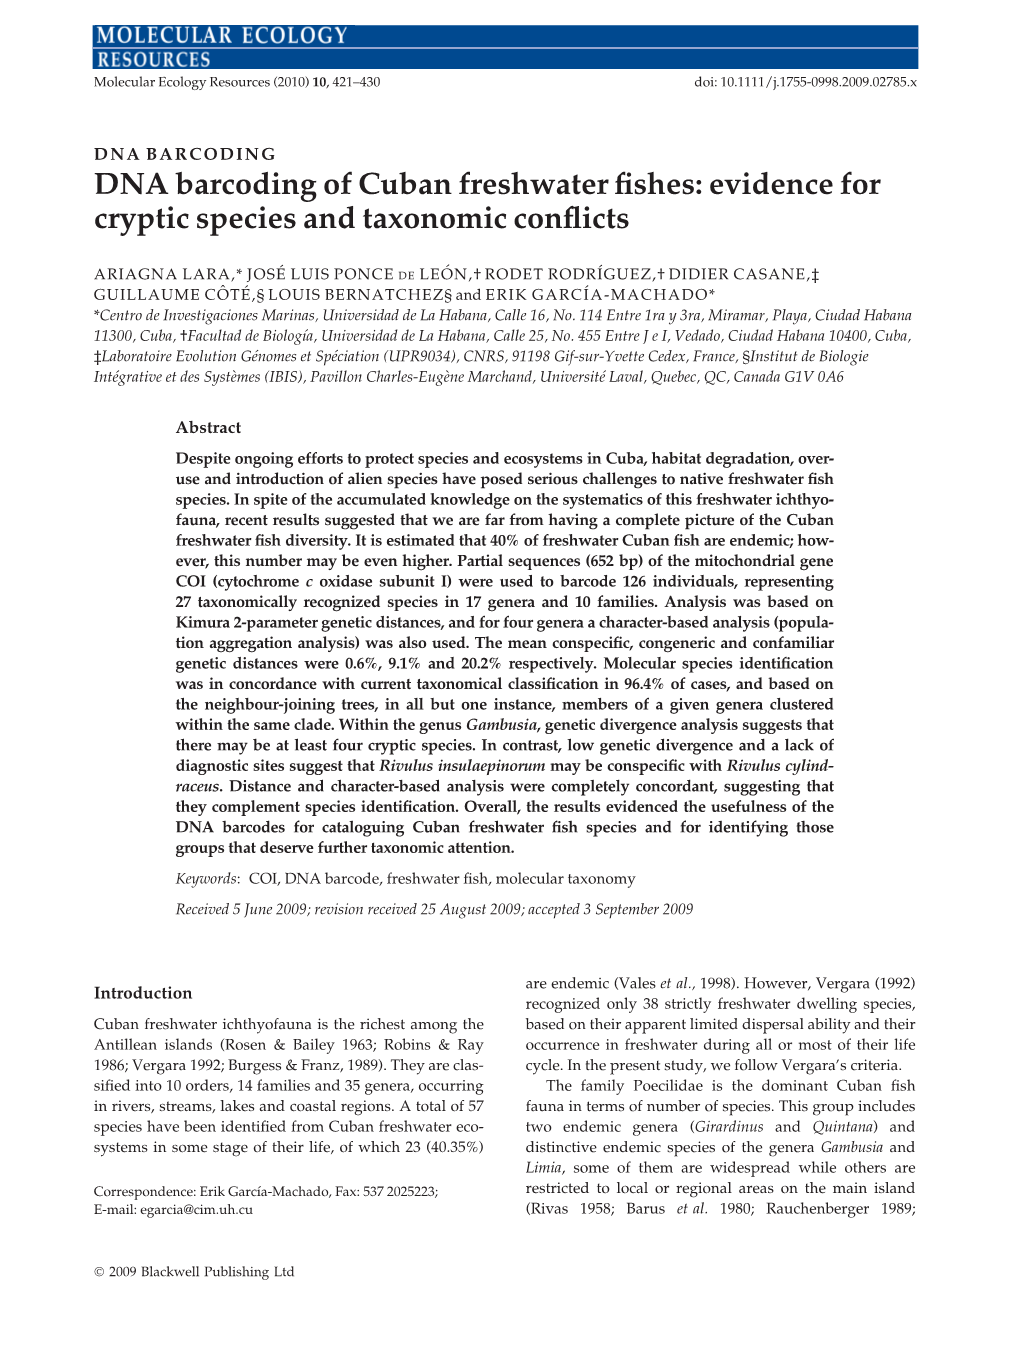 DNA Barcoding of Cuban Freshwater Fishes